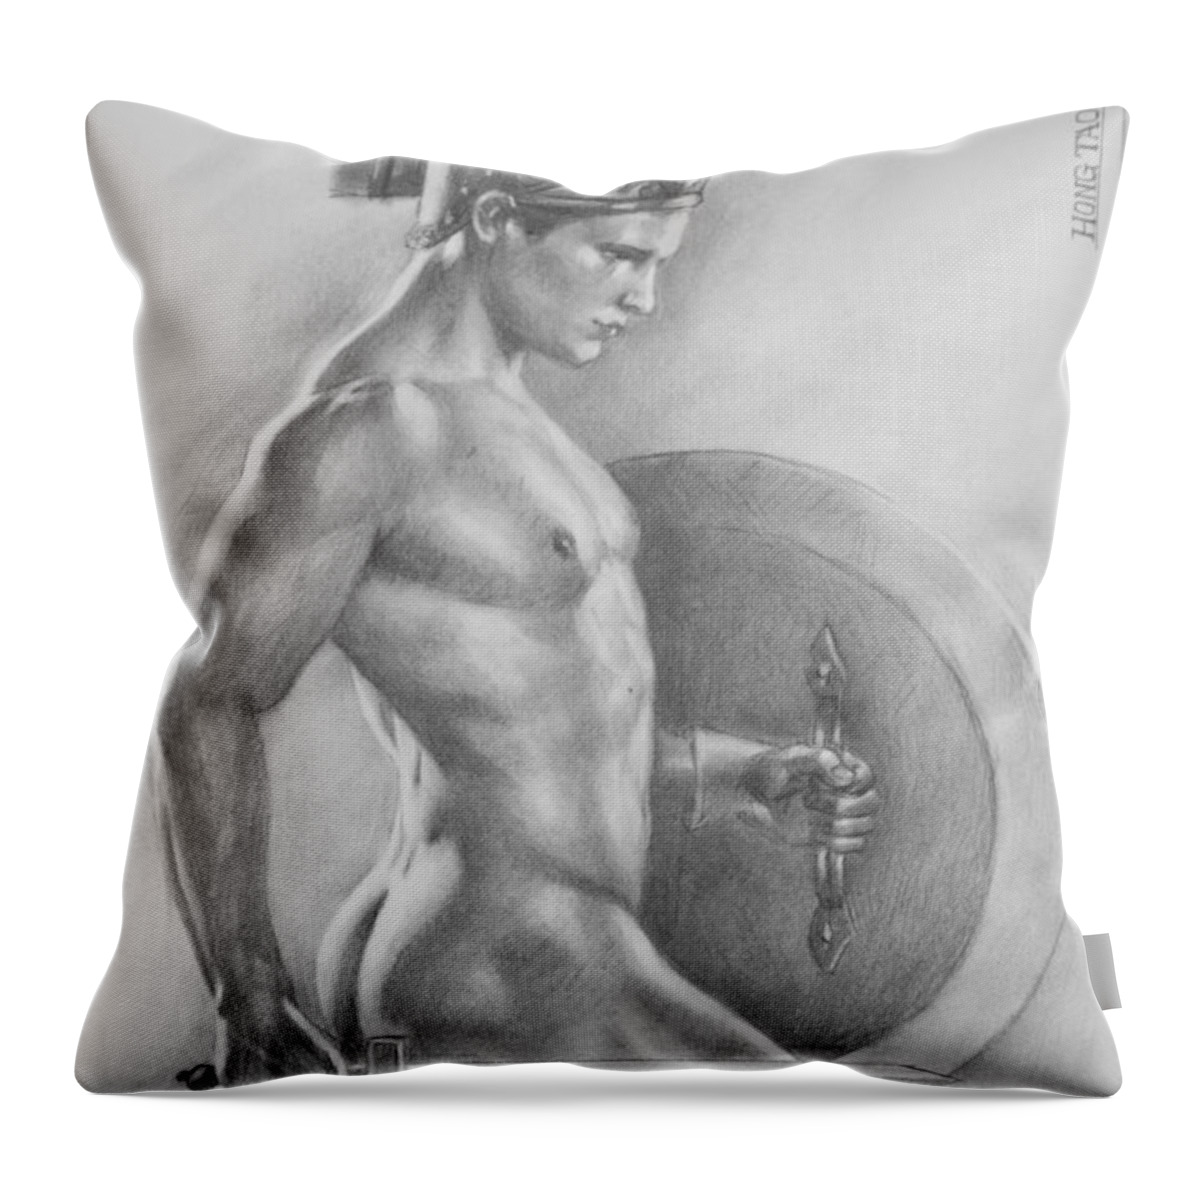 Original Sketch Throw Pillow featuring the painting Original Drawing Sketch Charcoal Male Nude Gay Man Art Pencil On Paper-073 by Hongtao Huang